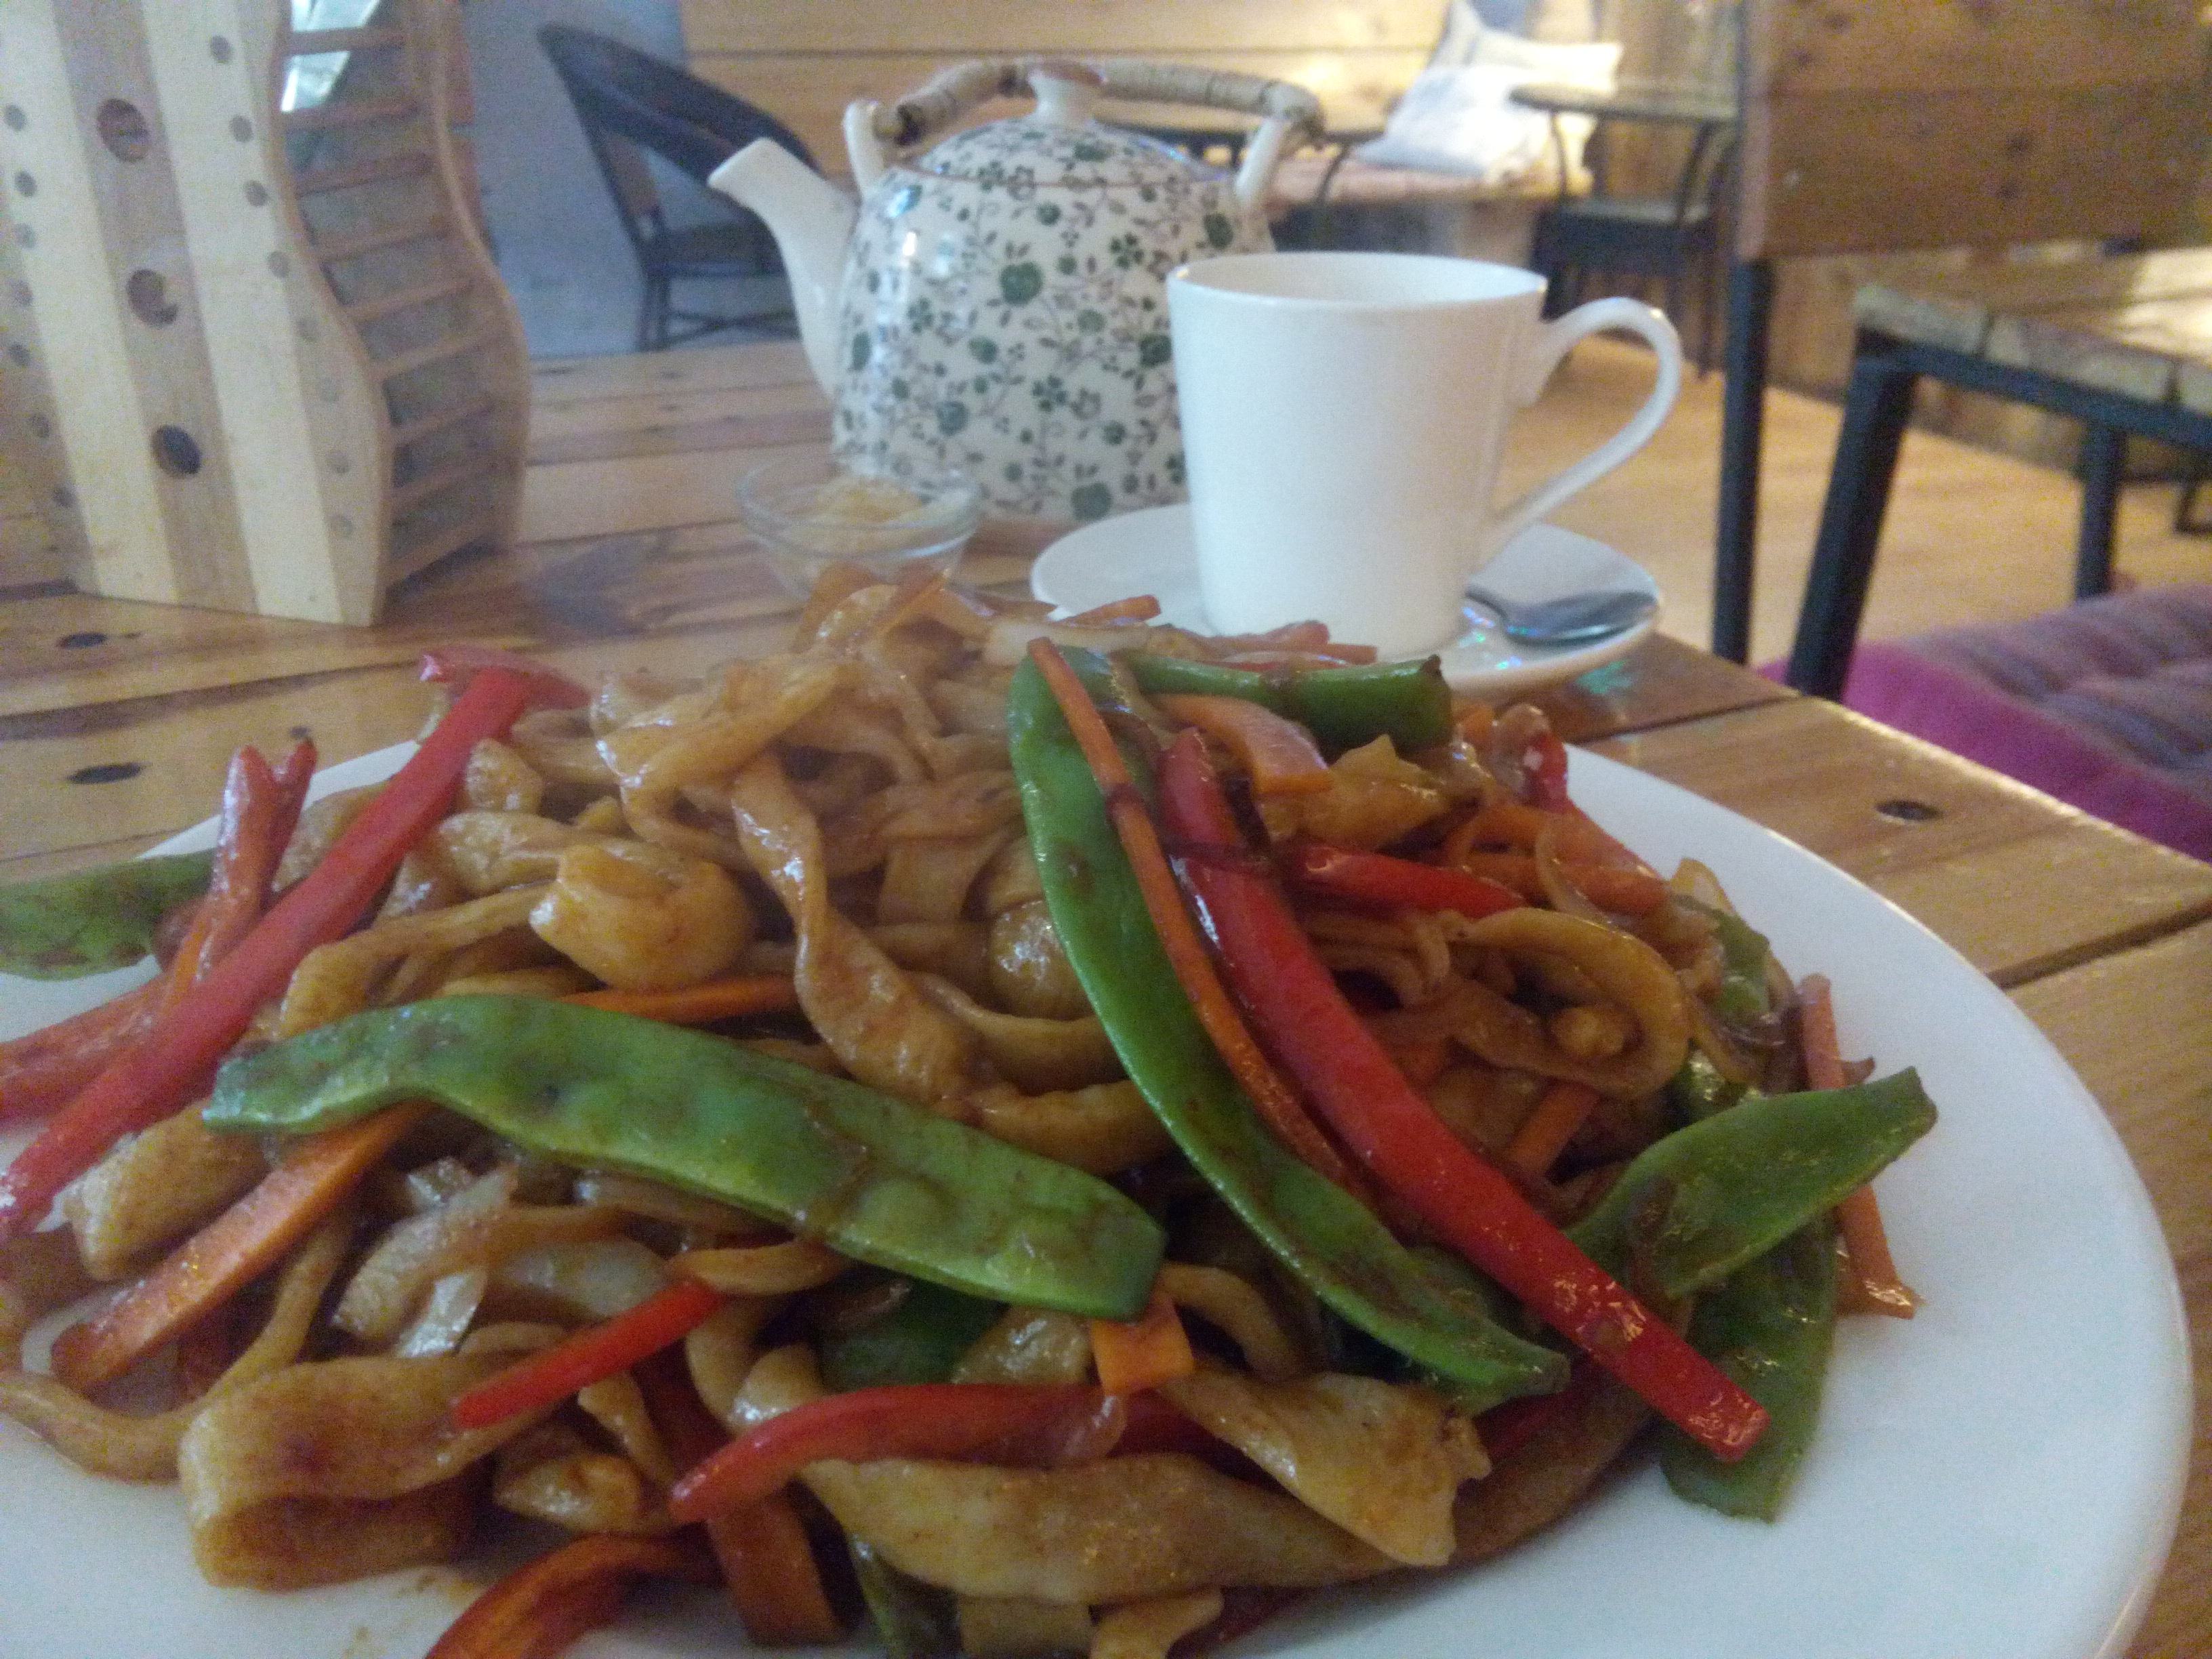 A plate piled high with brown noodles, red and green vegetables, and a teacup and pot in the background